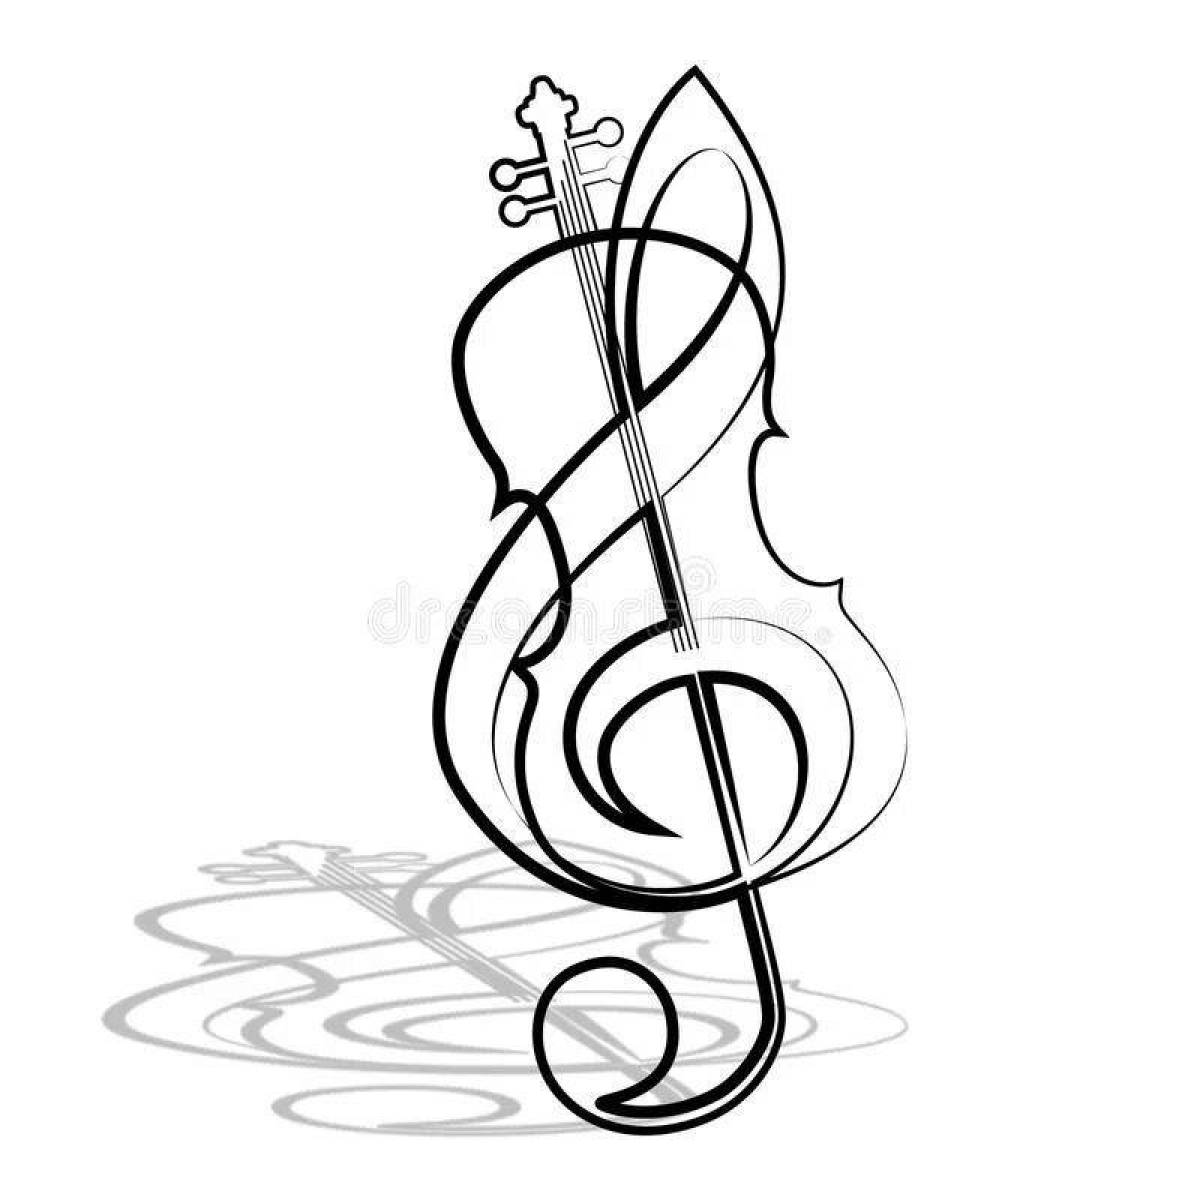 Ecstatic sheet music coloring page